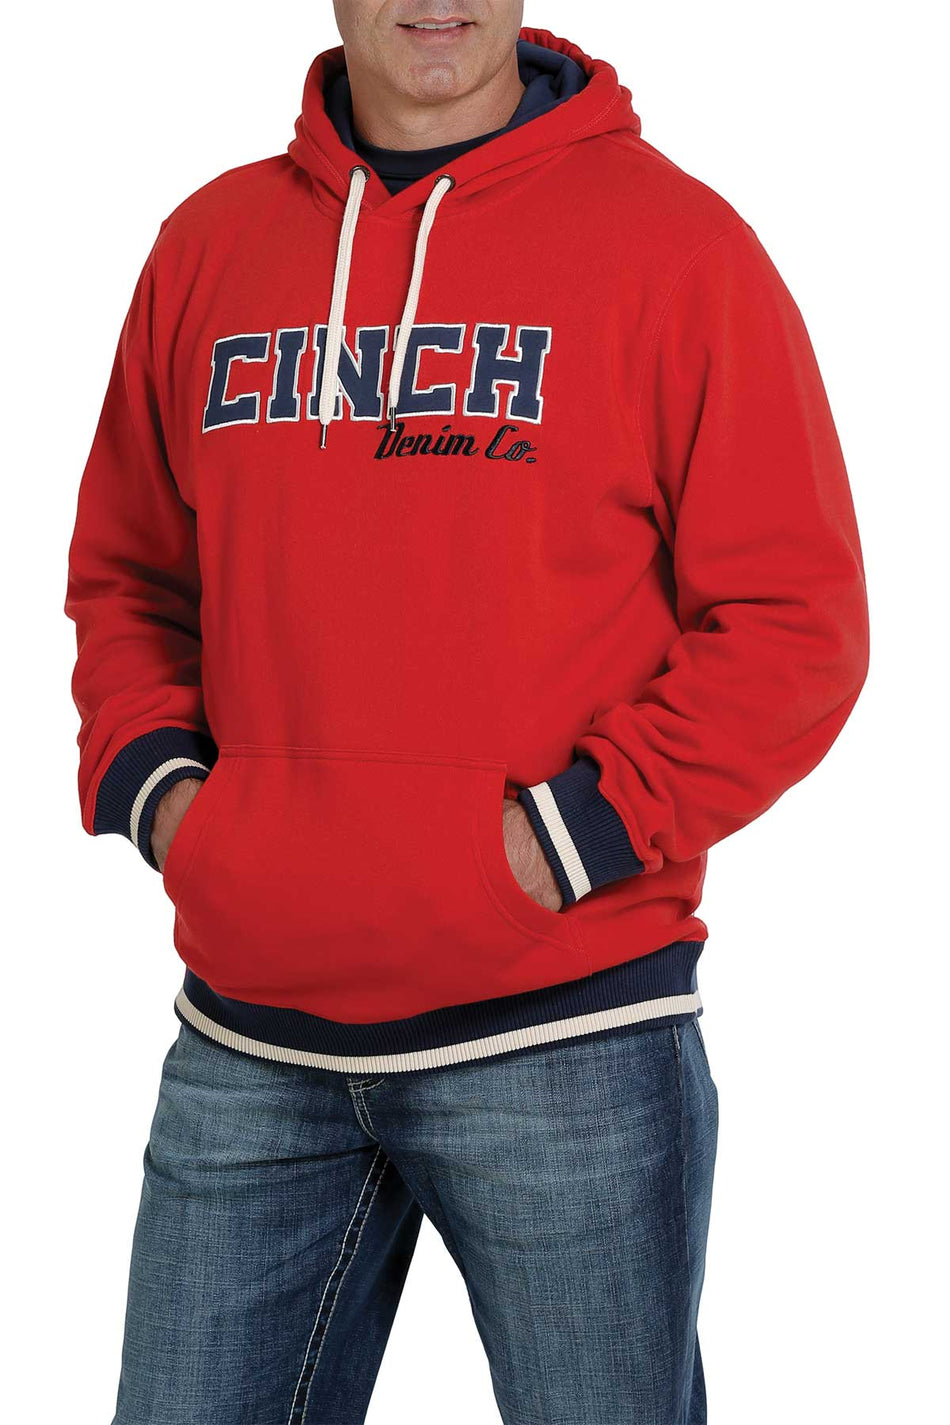 Cinch - Mens Red Embroidered Logo Fleece-Lined Hooded Sweatshirt